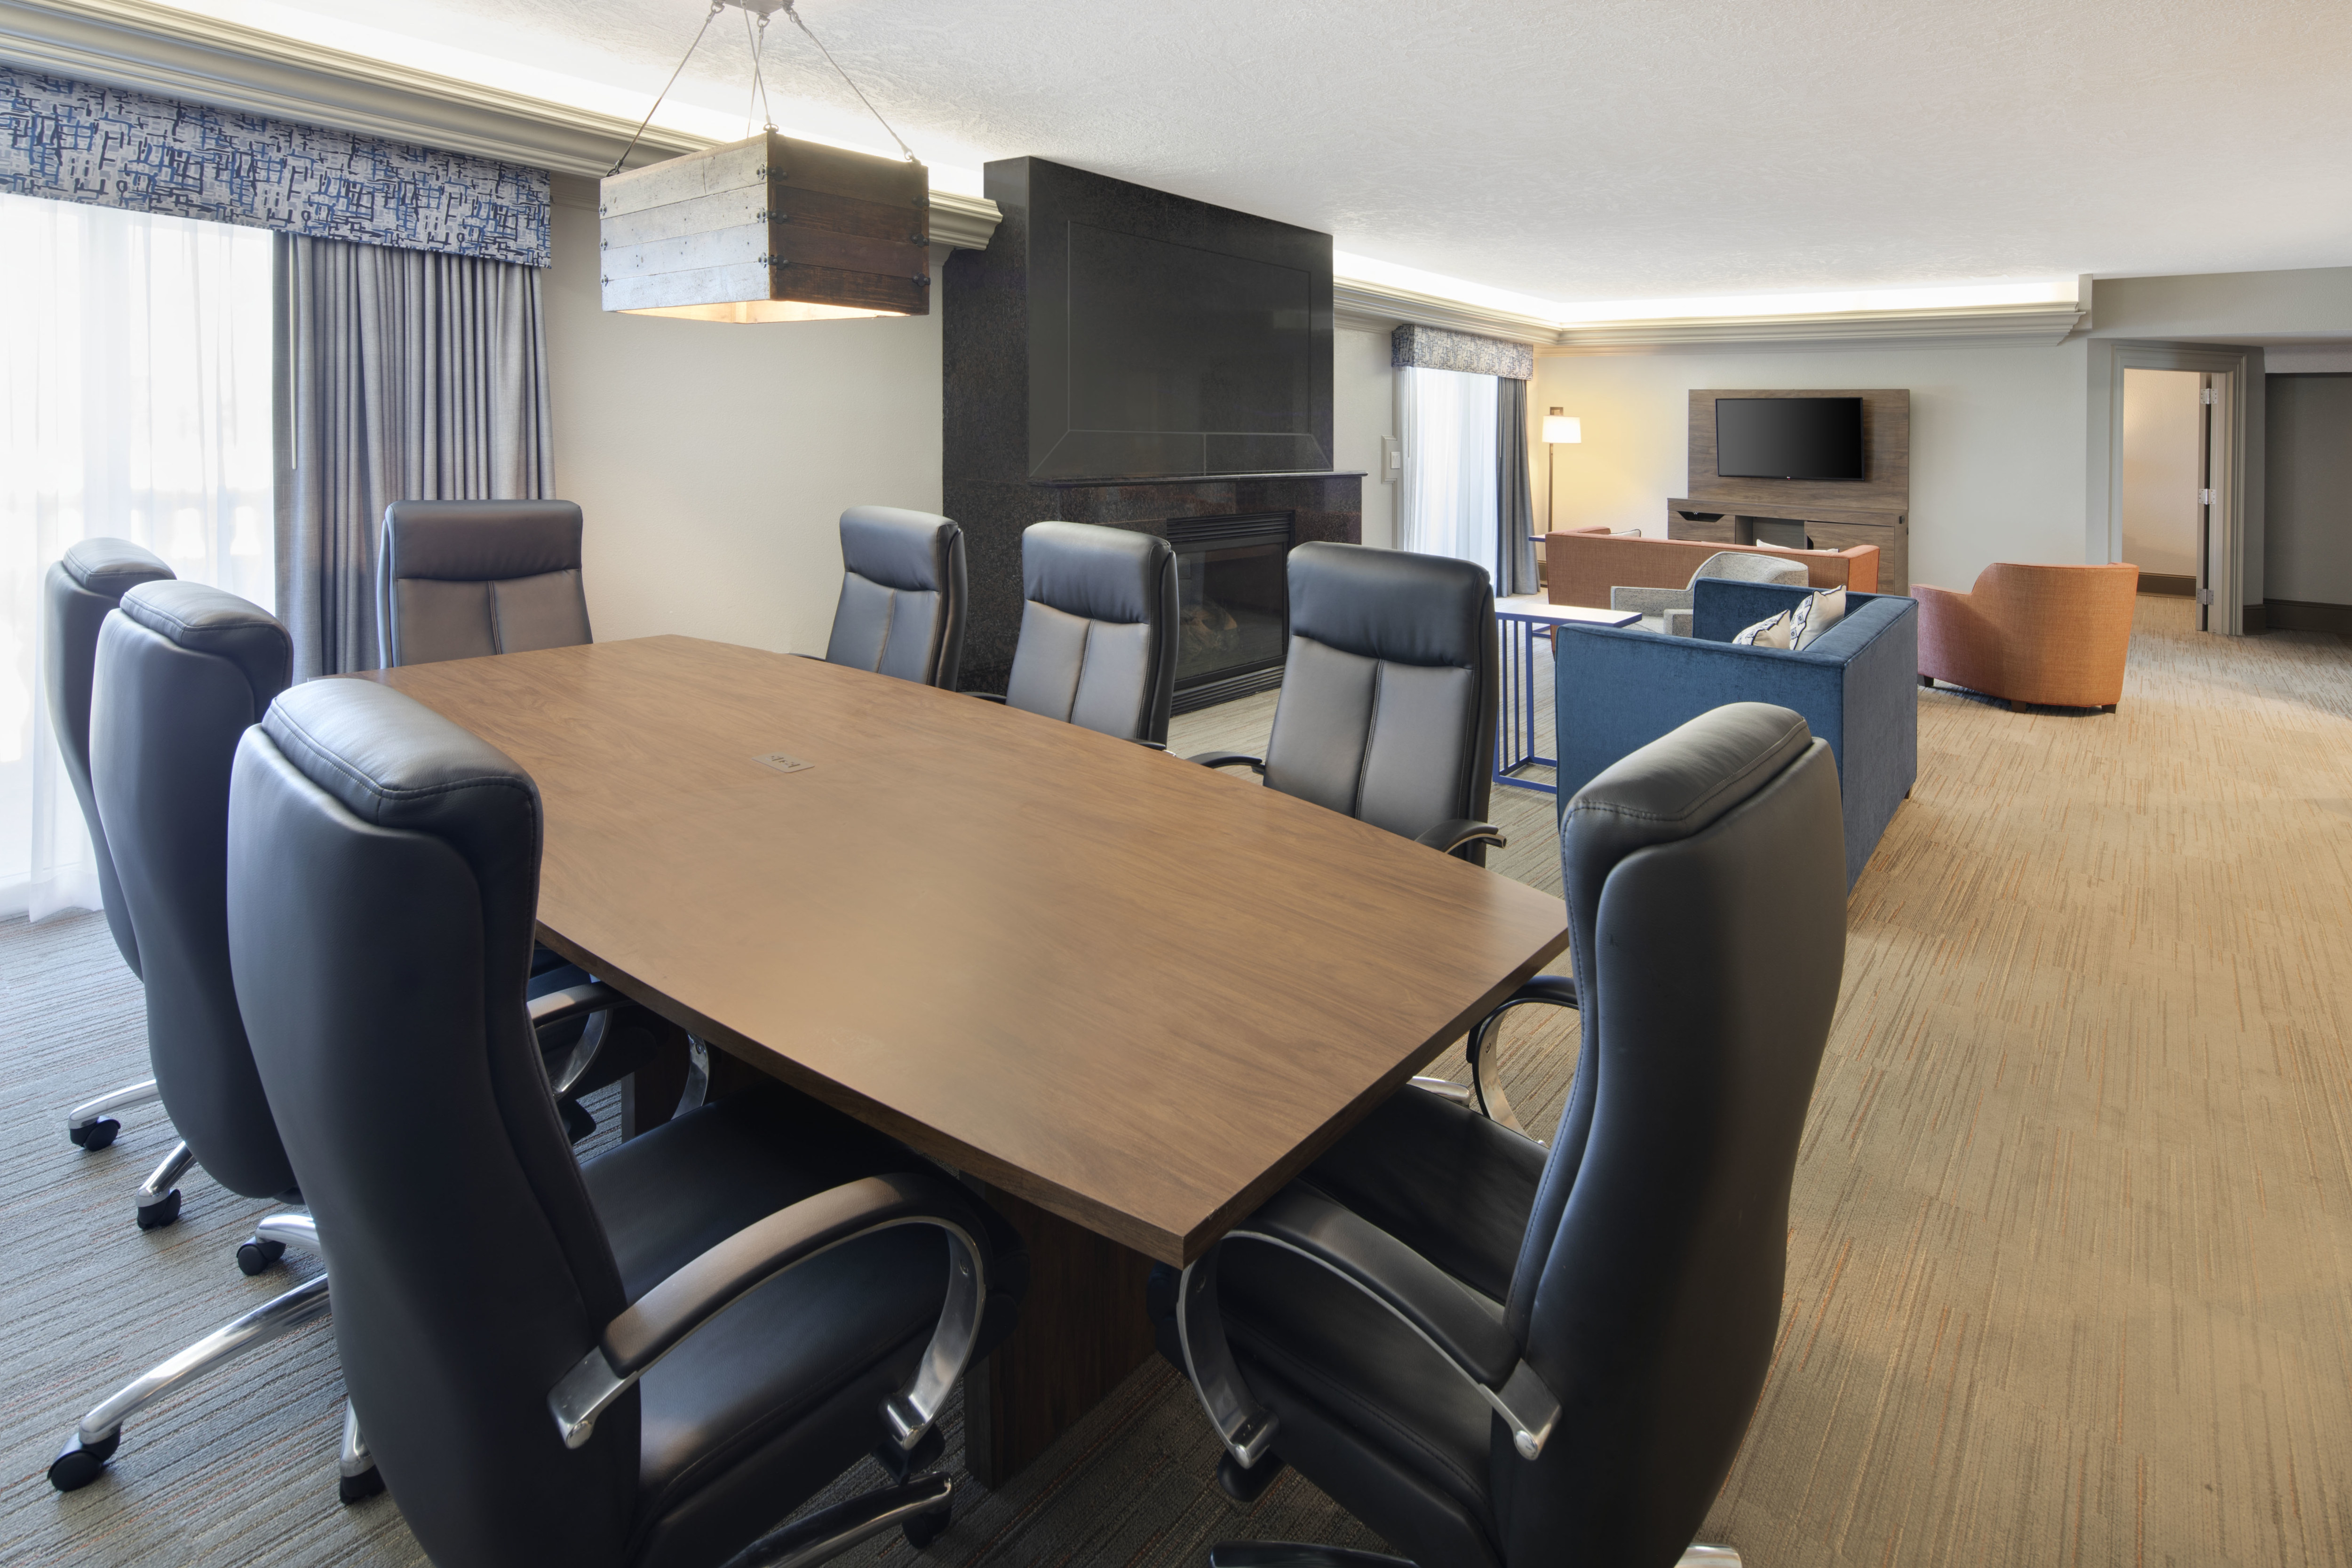 Suite With Meeting Table